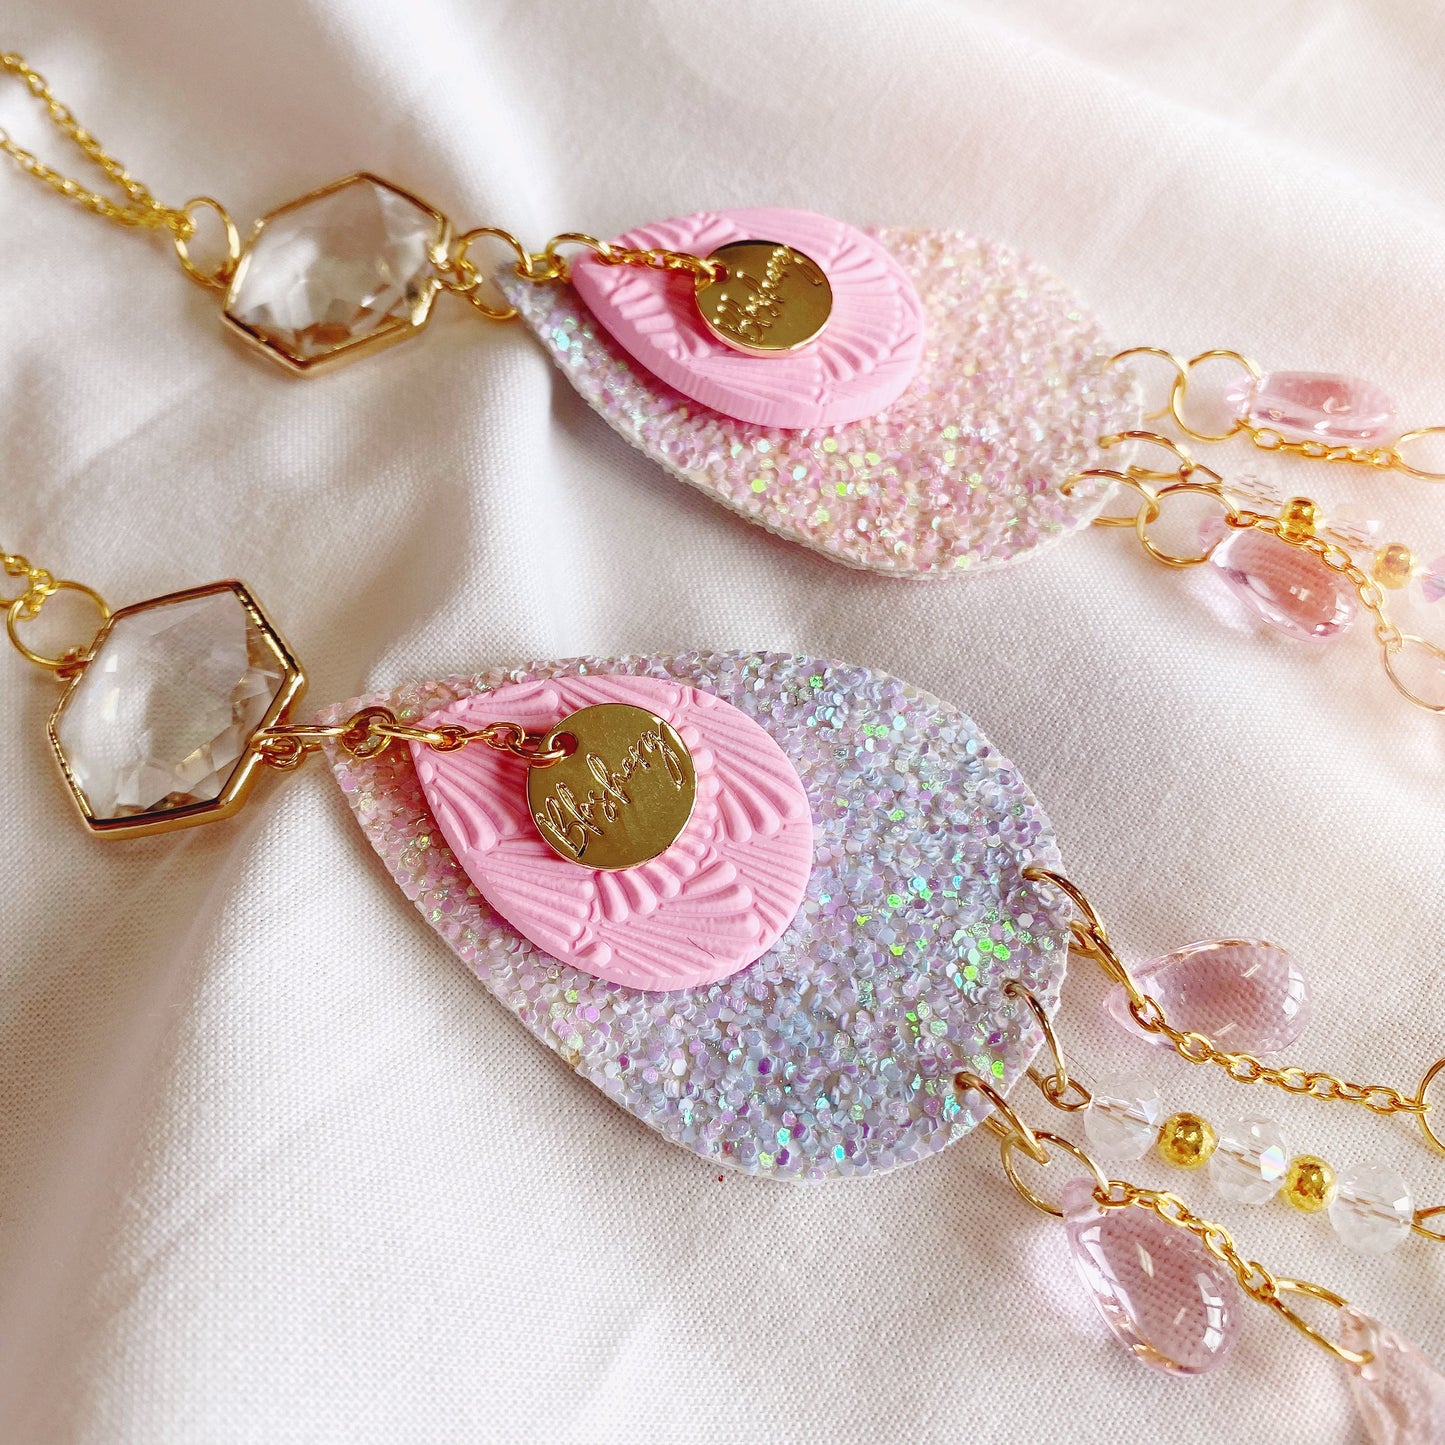 pink glitter and polymer clay pieces, with glass crystal beads to hang from the window